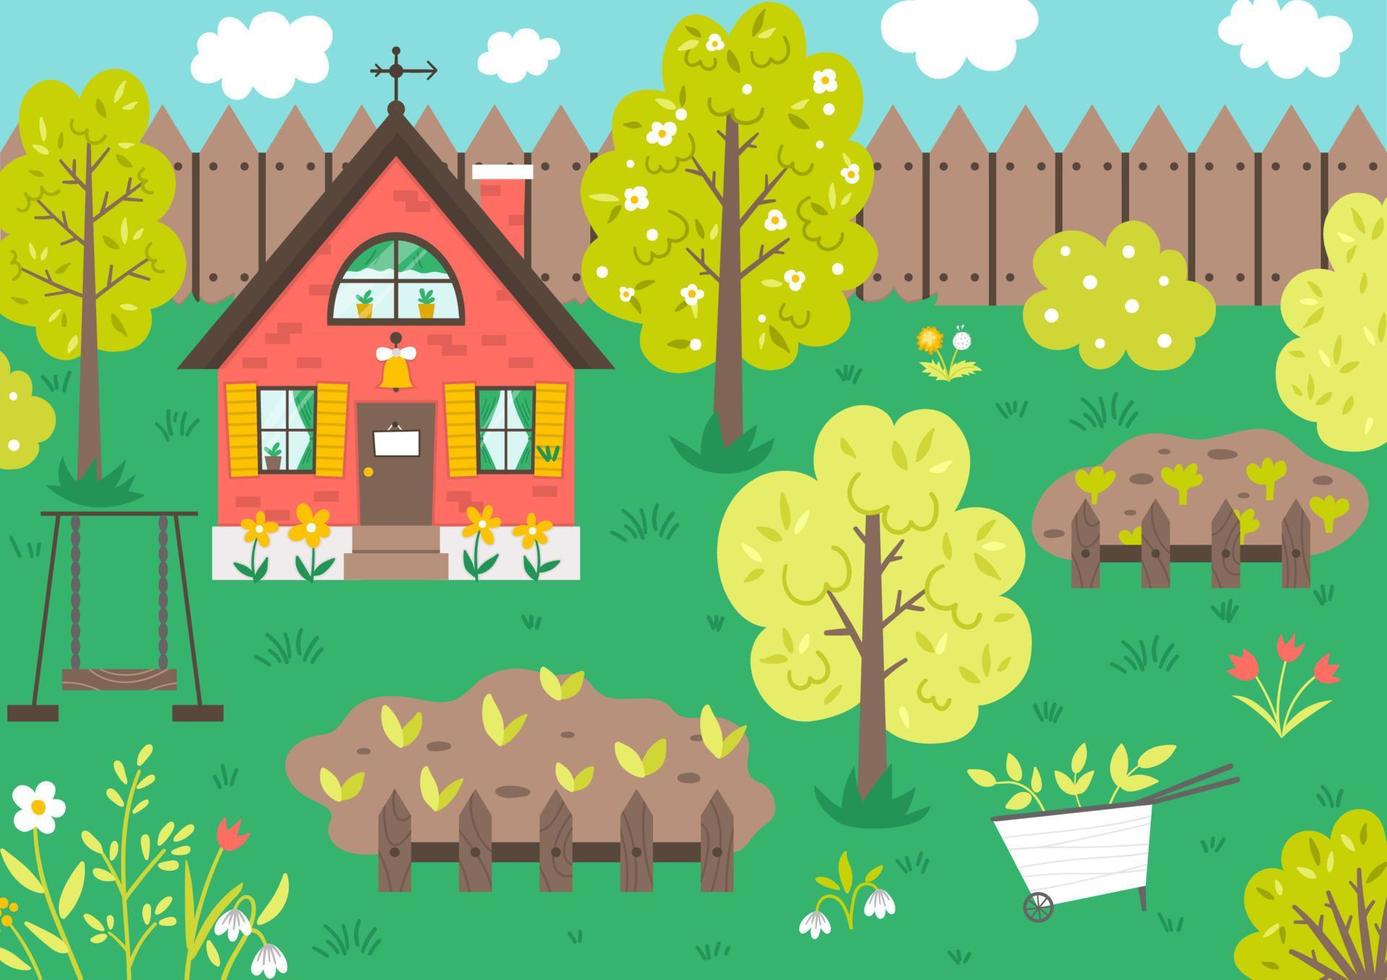 Vector garden scene with trees, country house, vegetable beds, flowers, swing. Spring gardening scenery. Cute cottage illustration. Rural landscape. Farm living concept